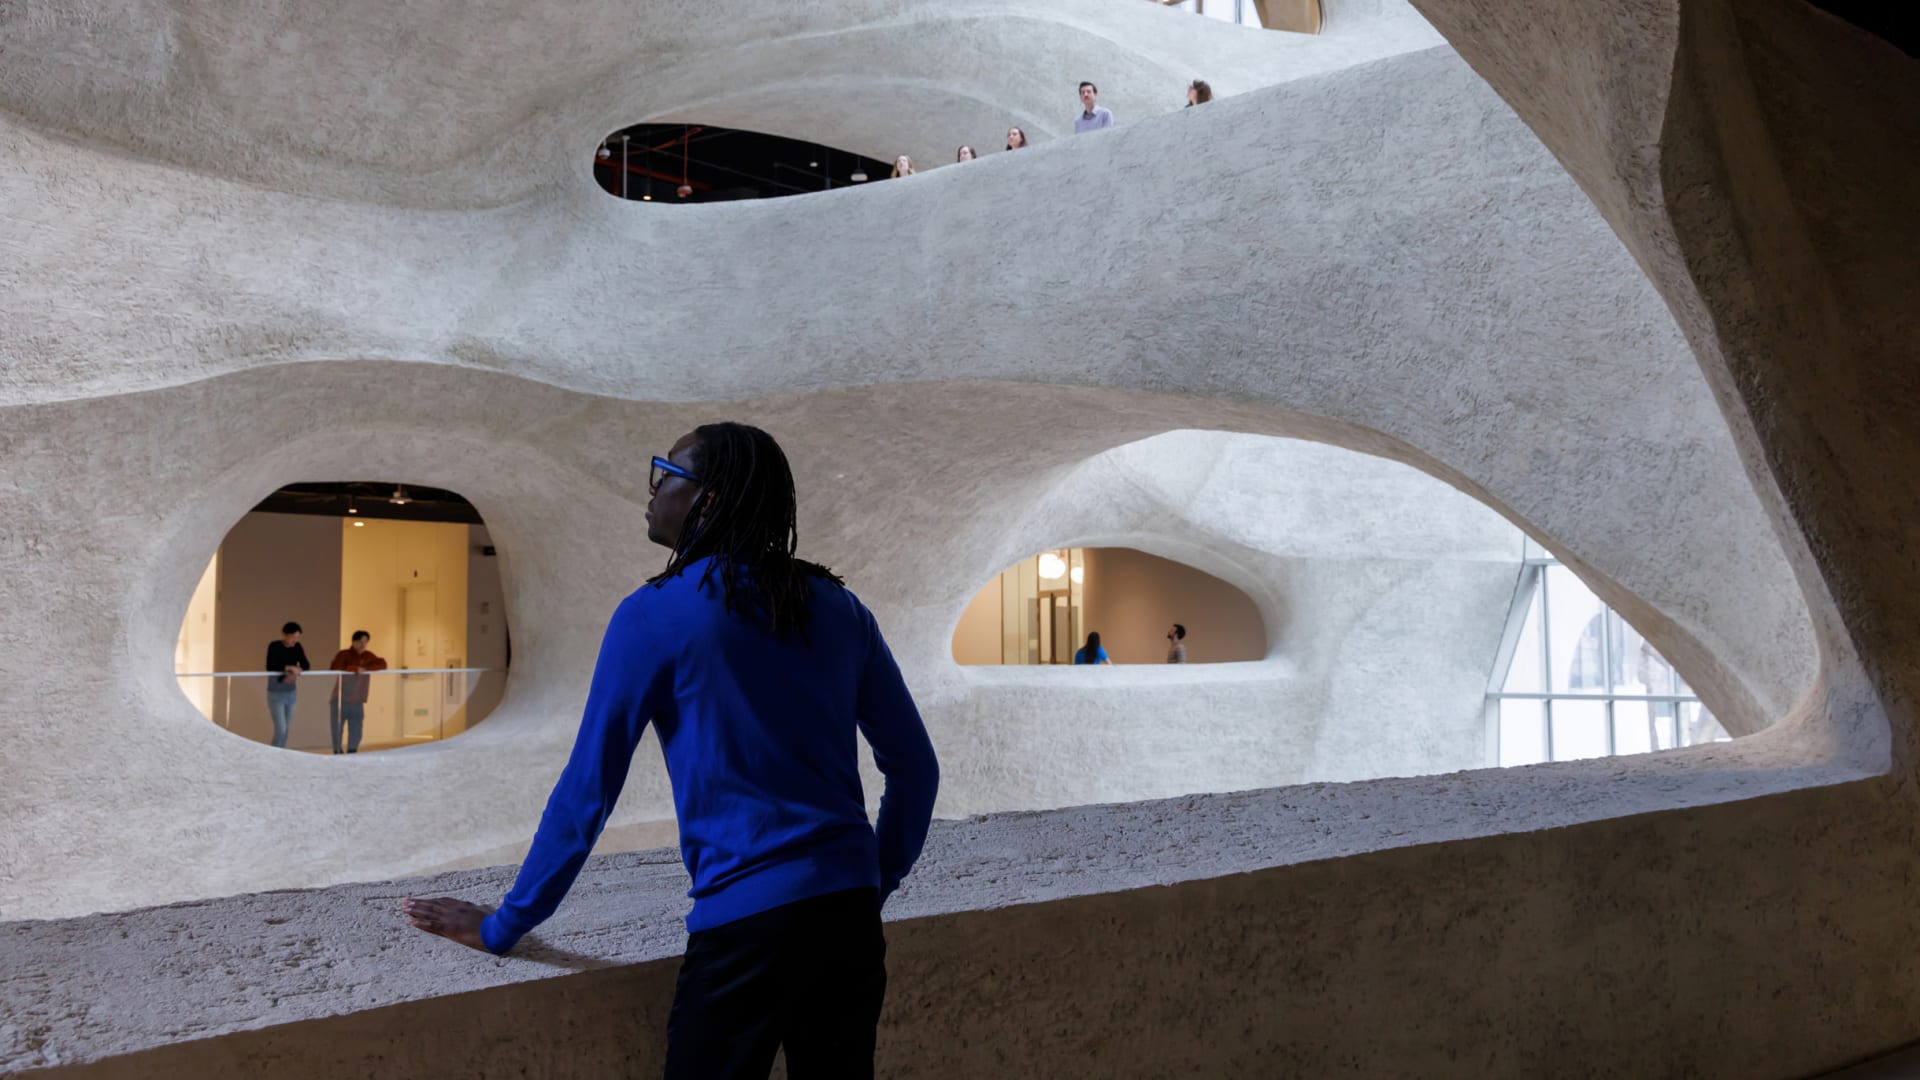 This spectacular new museum could be a skeleton, a cave, or the fabric of the universe